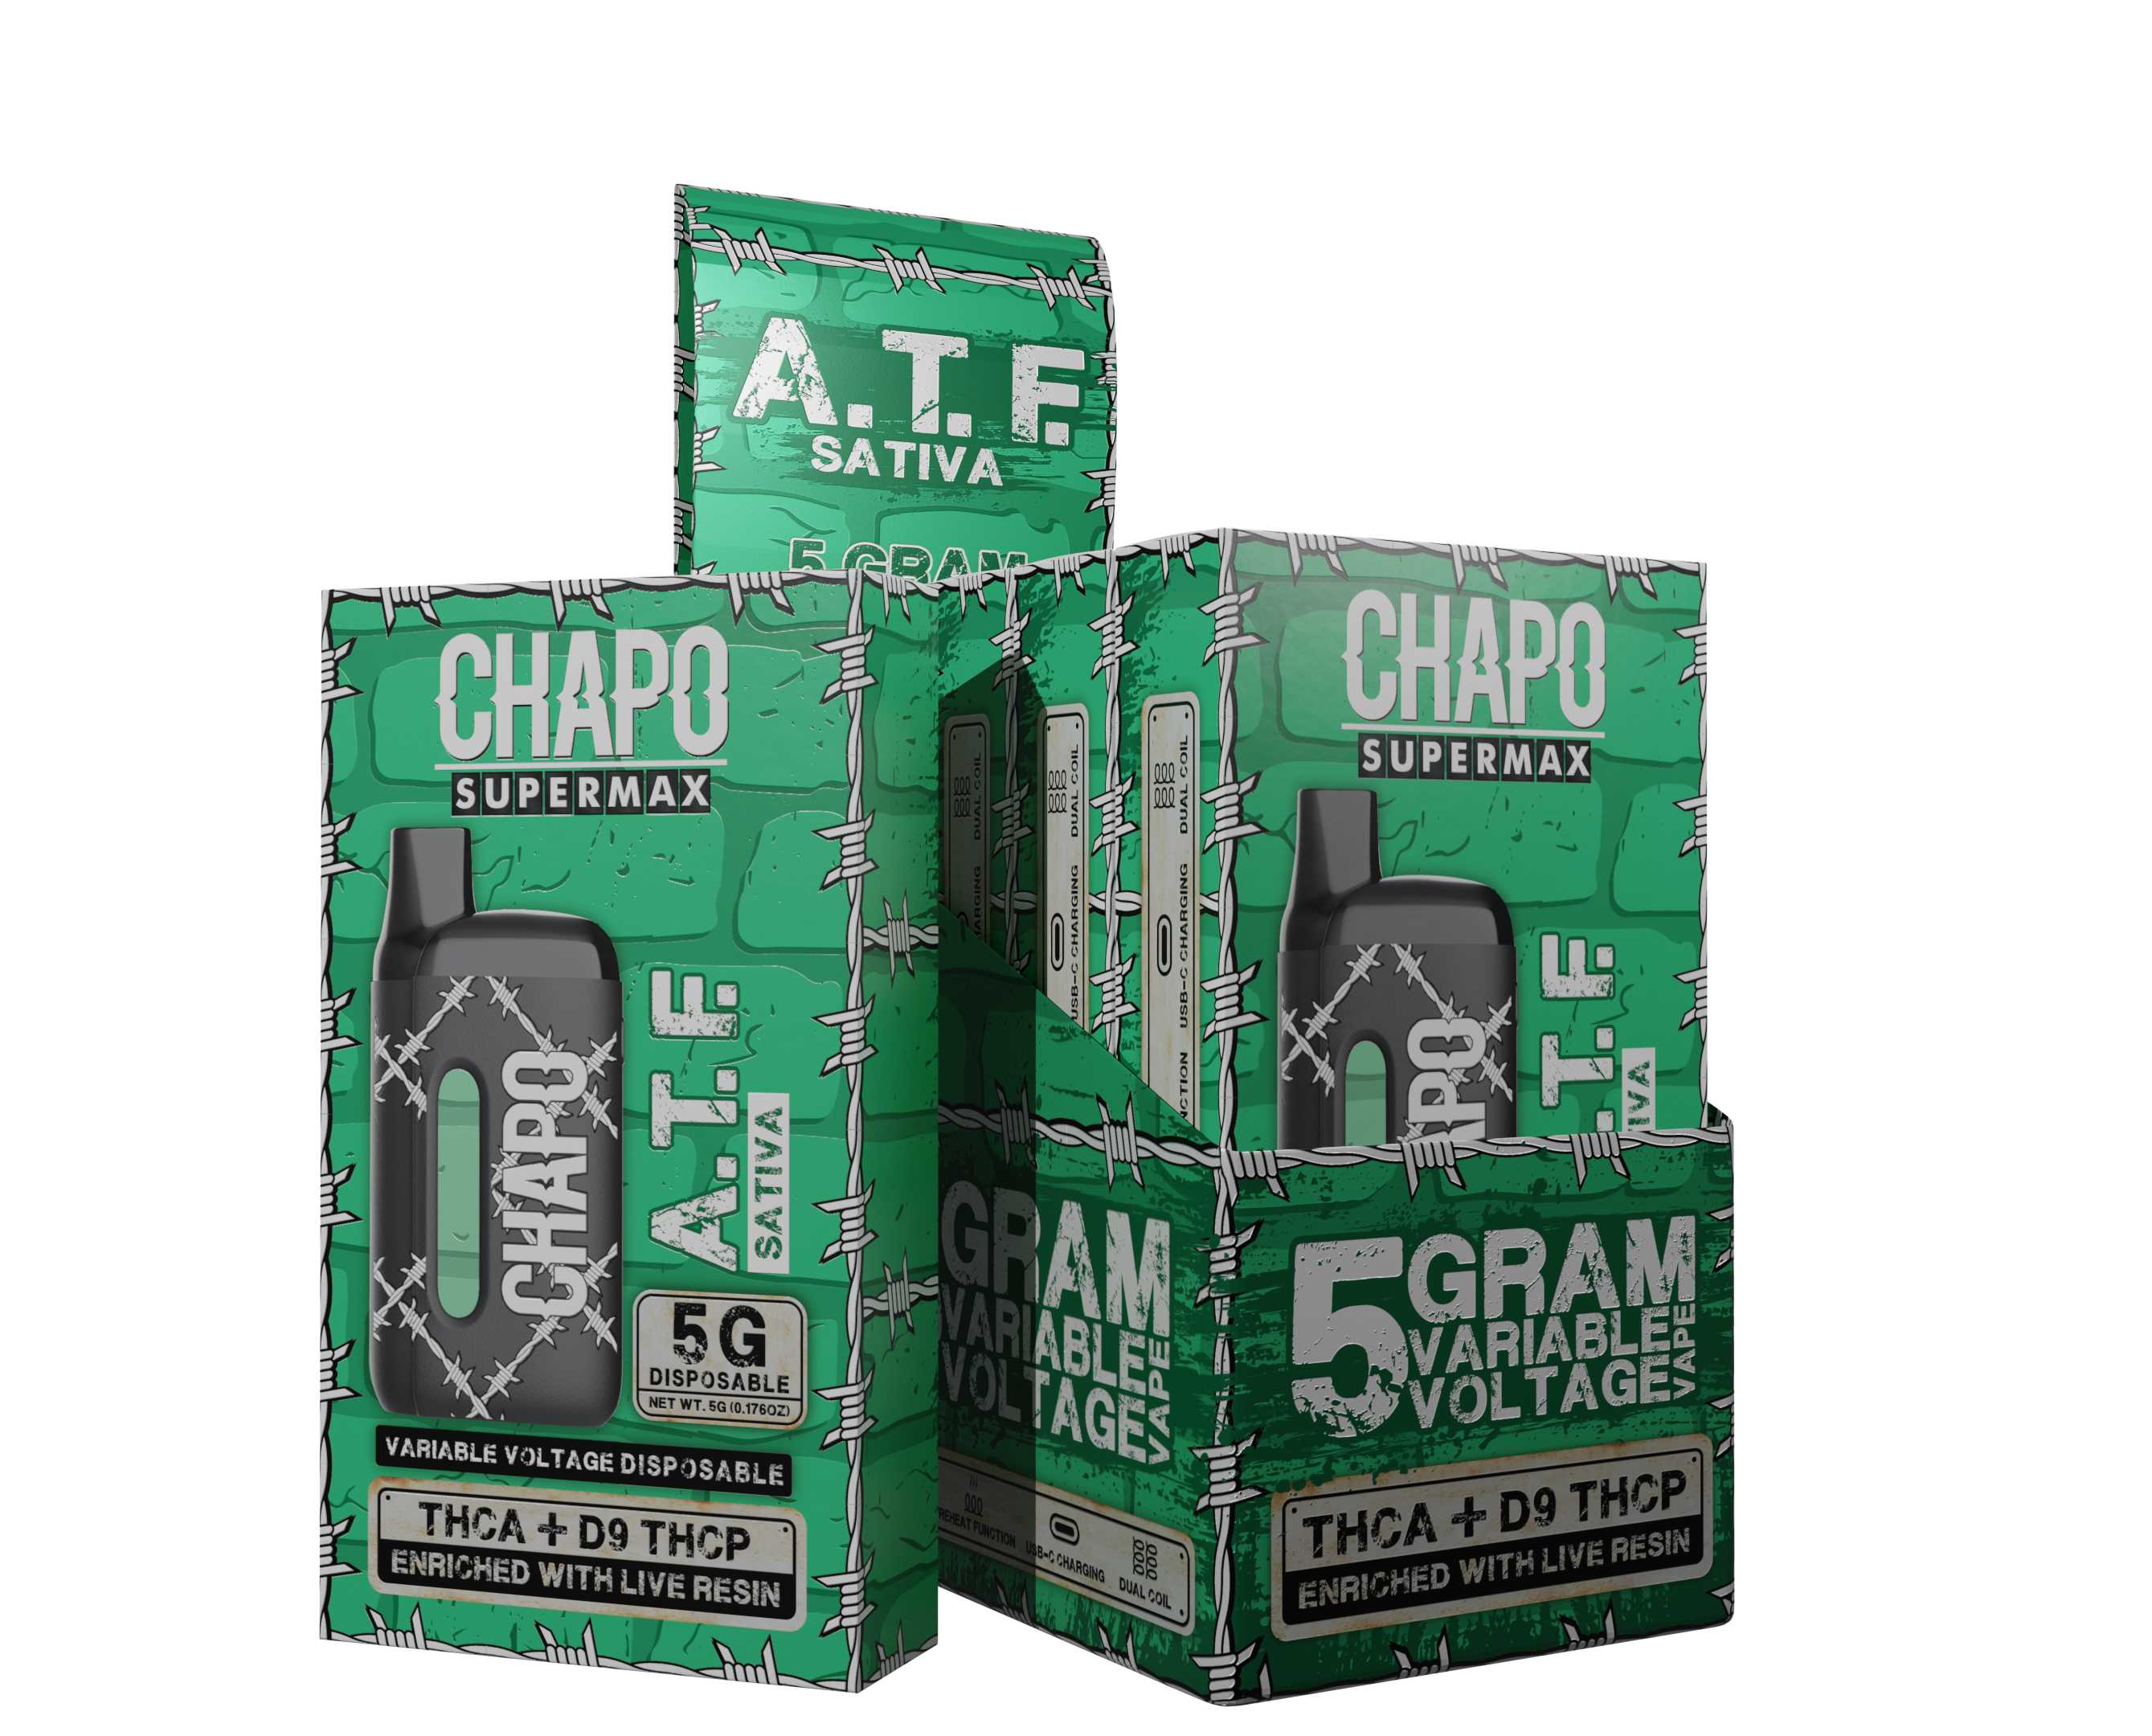 Chapo Supermax THC-A + D9 THC-P Enriched with Live Resin 5g Disposables 6 pack - Vape Masterz